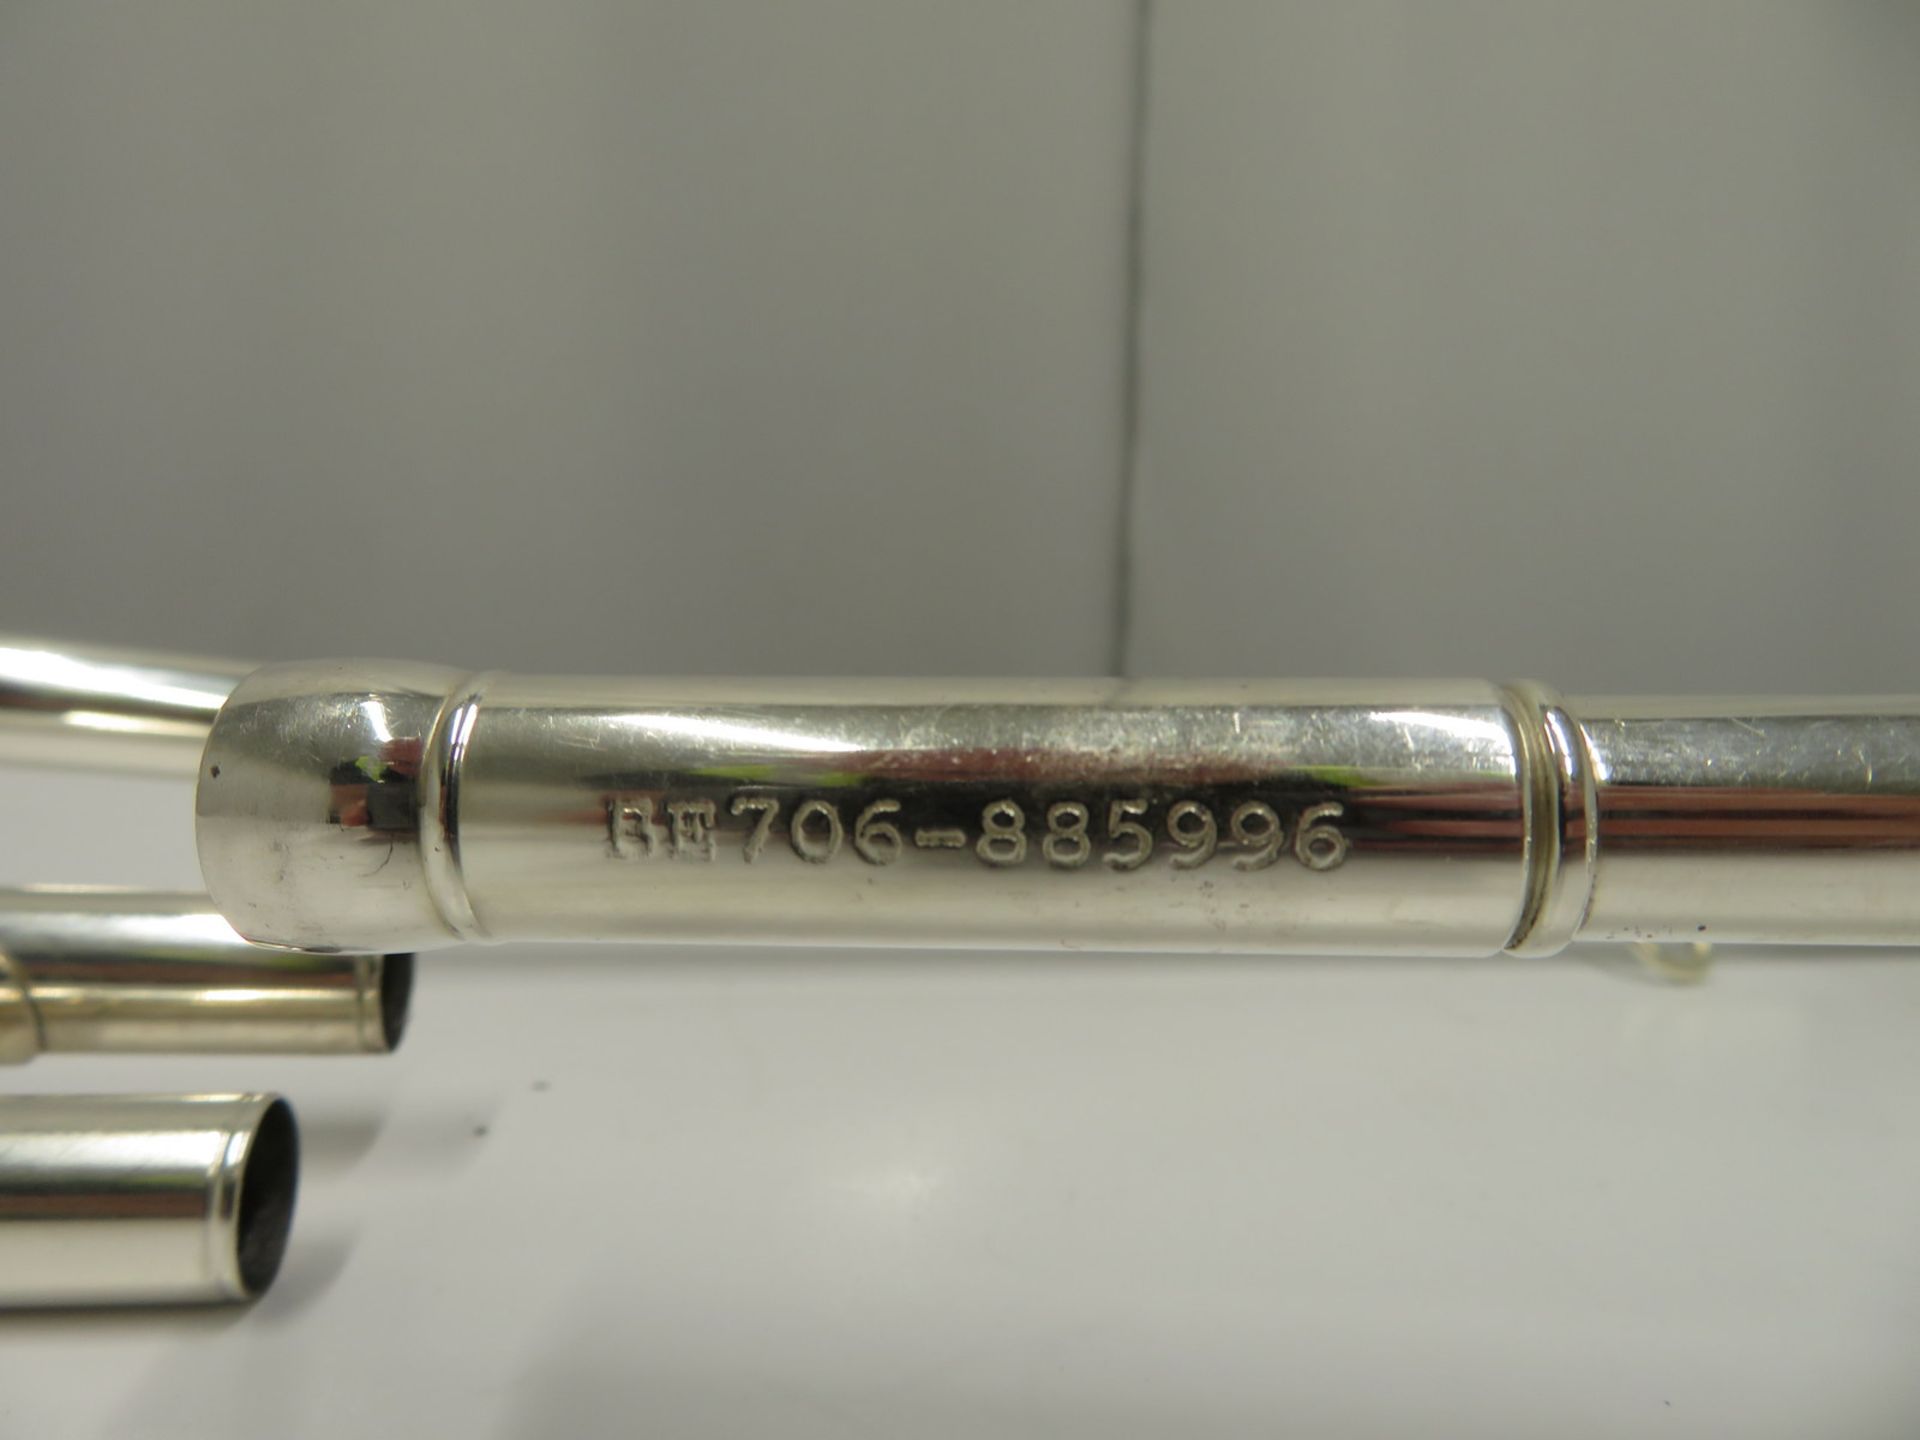 Besson BE706 International fanfare trumpet with case. Serial number: 885996. - Image 13 of 14